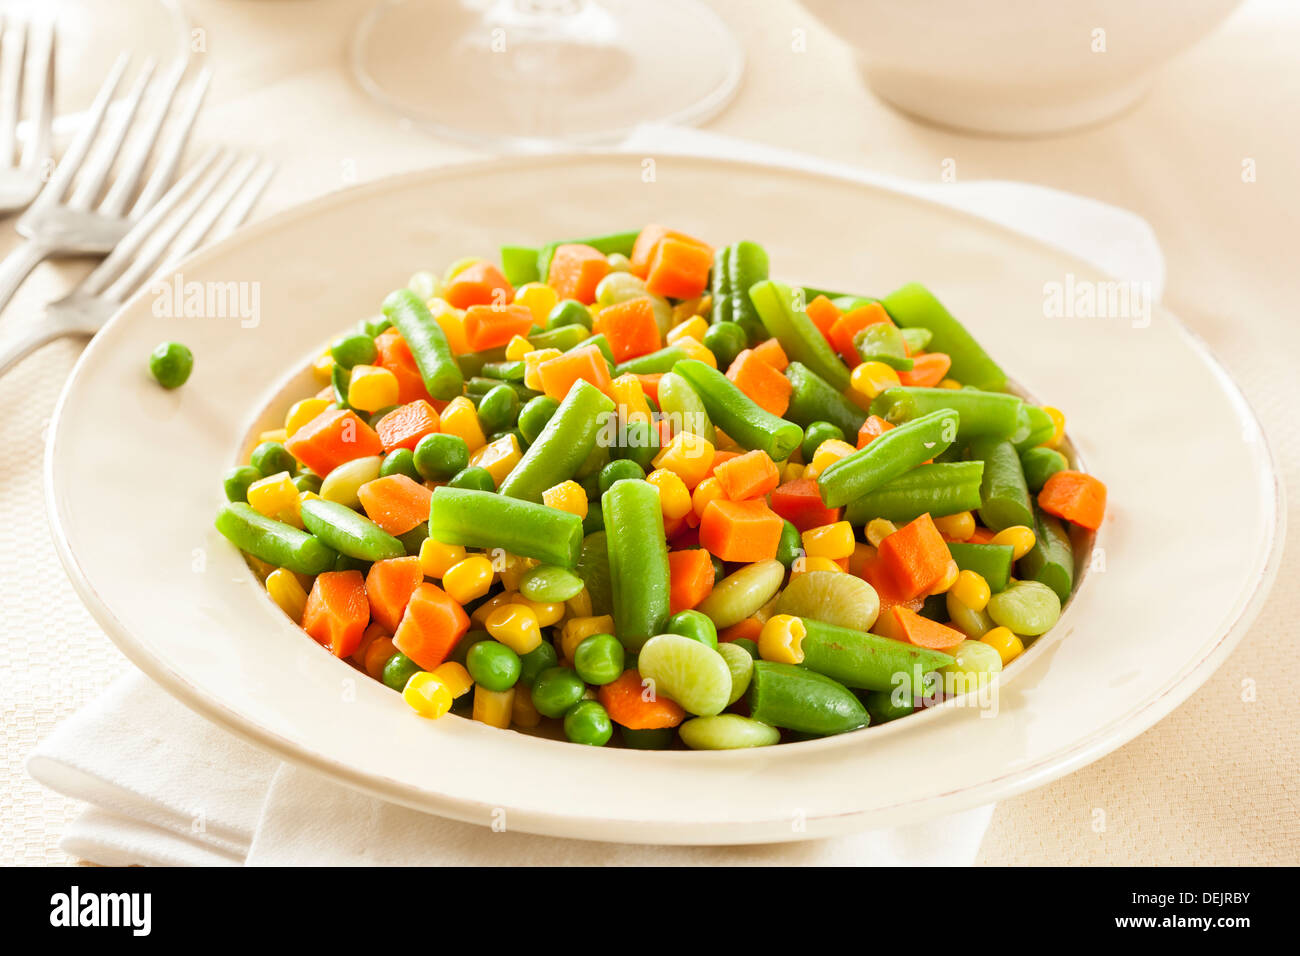 Steamed Organic Vegetable Medly with Peas, Corn, Beans, and Carrots Stock Photo